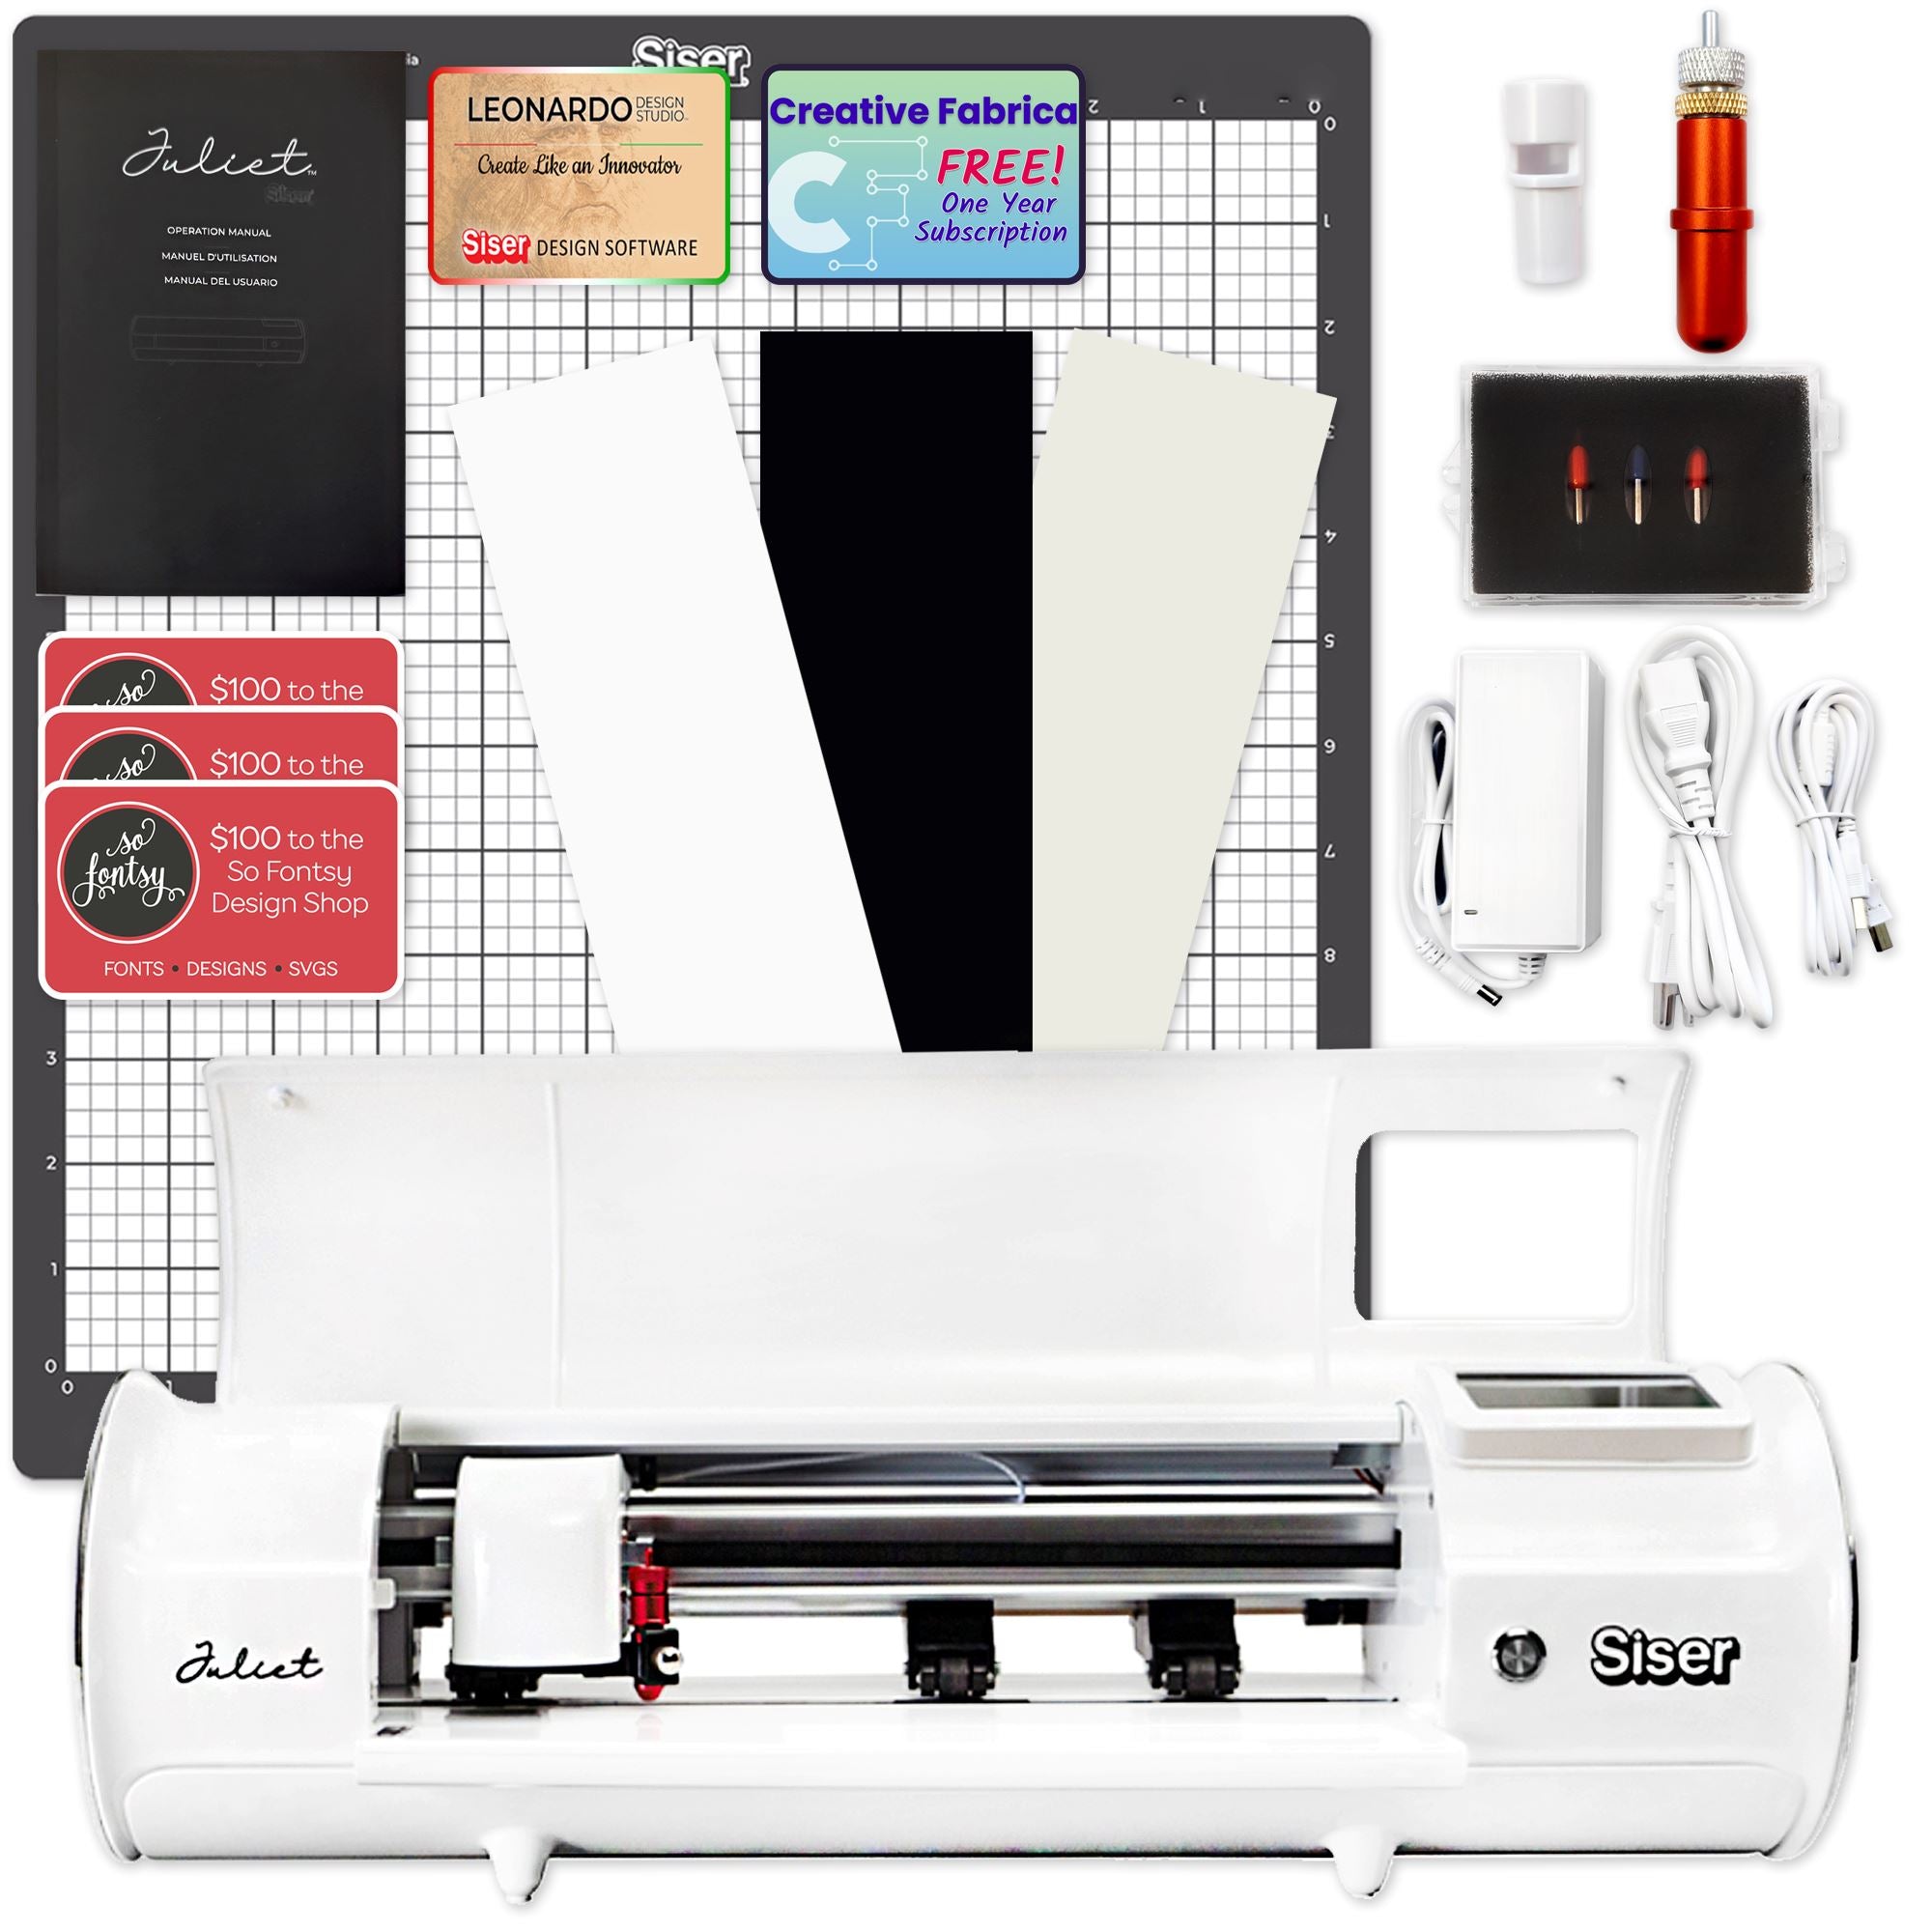 Silhouette White Cameo 4 w/ Deluxe Blade & Tool Pack, Mat Pack, Guides,  Designs